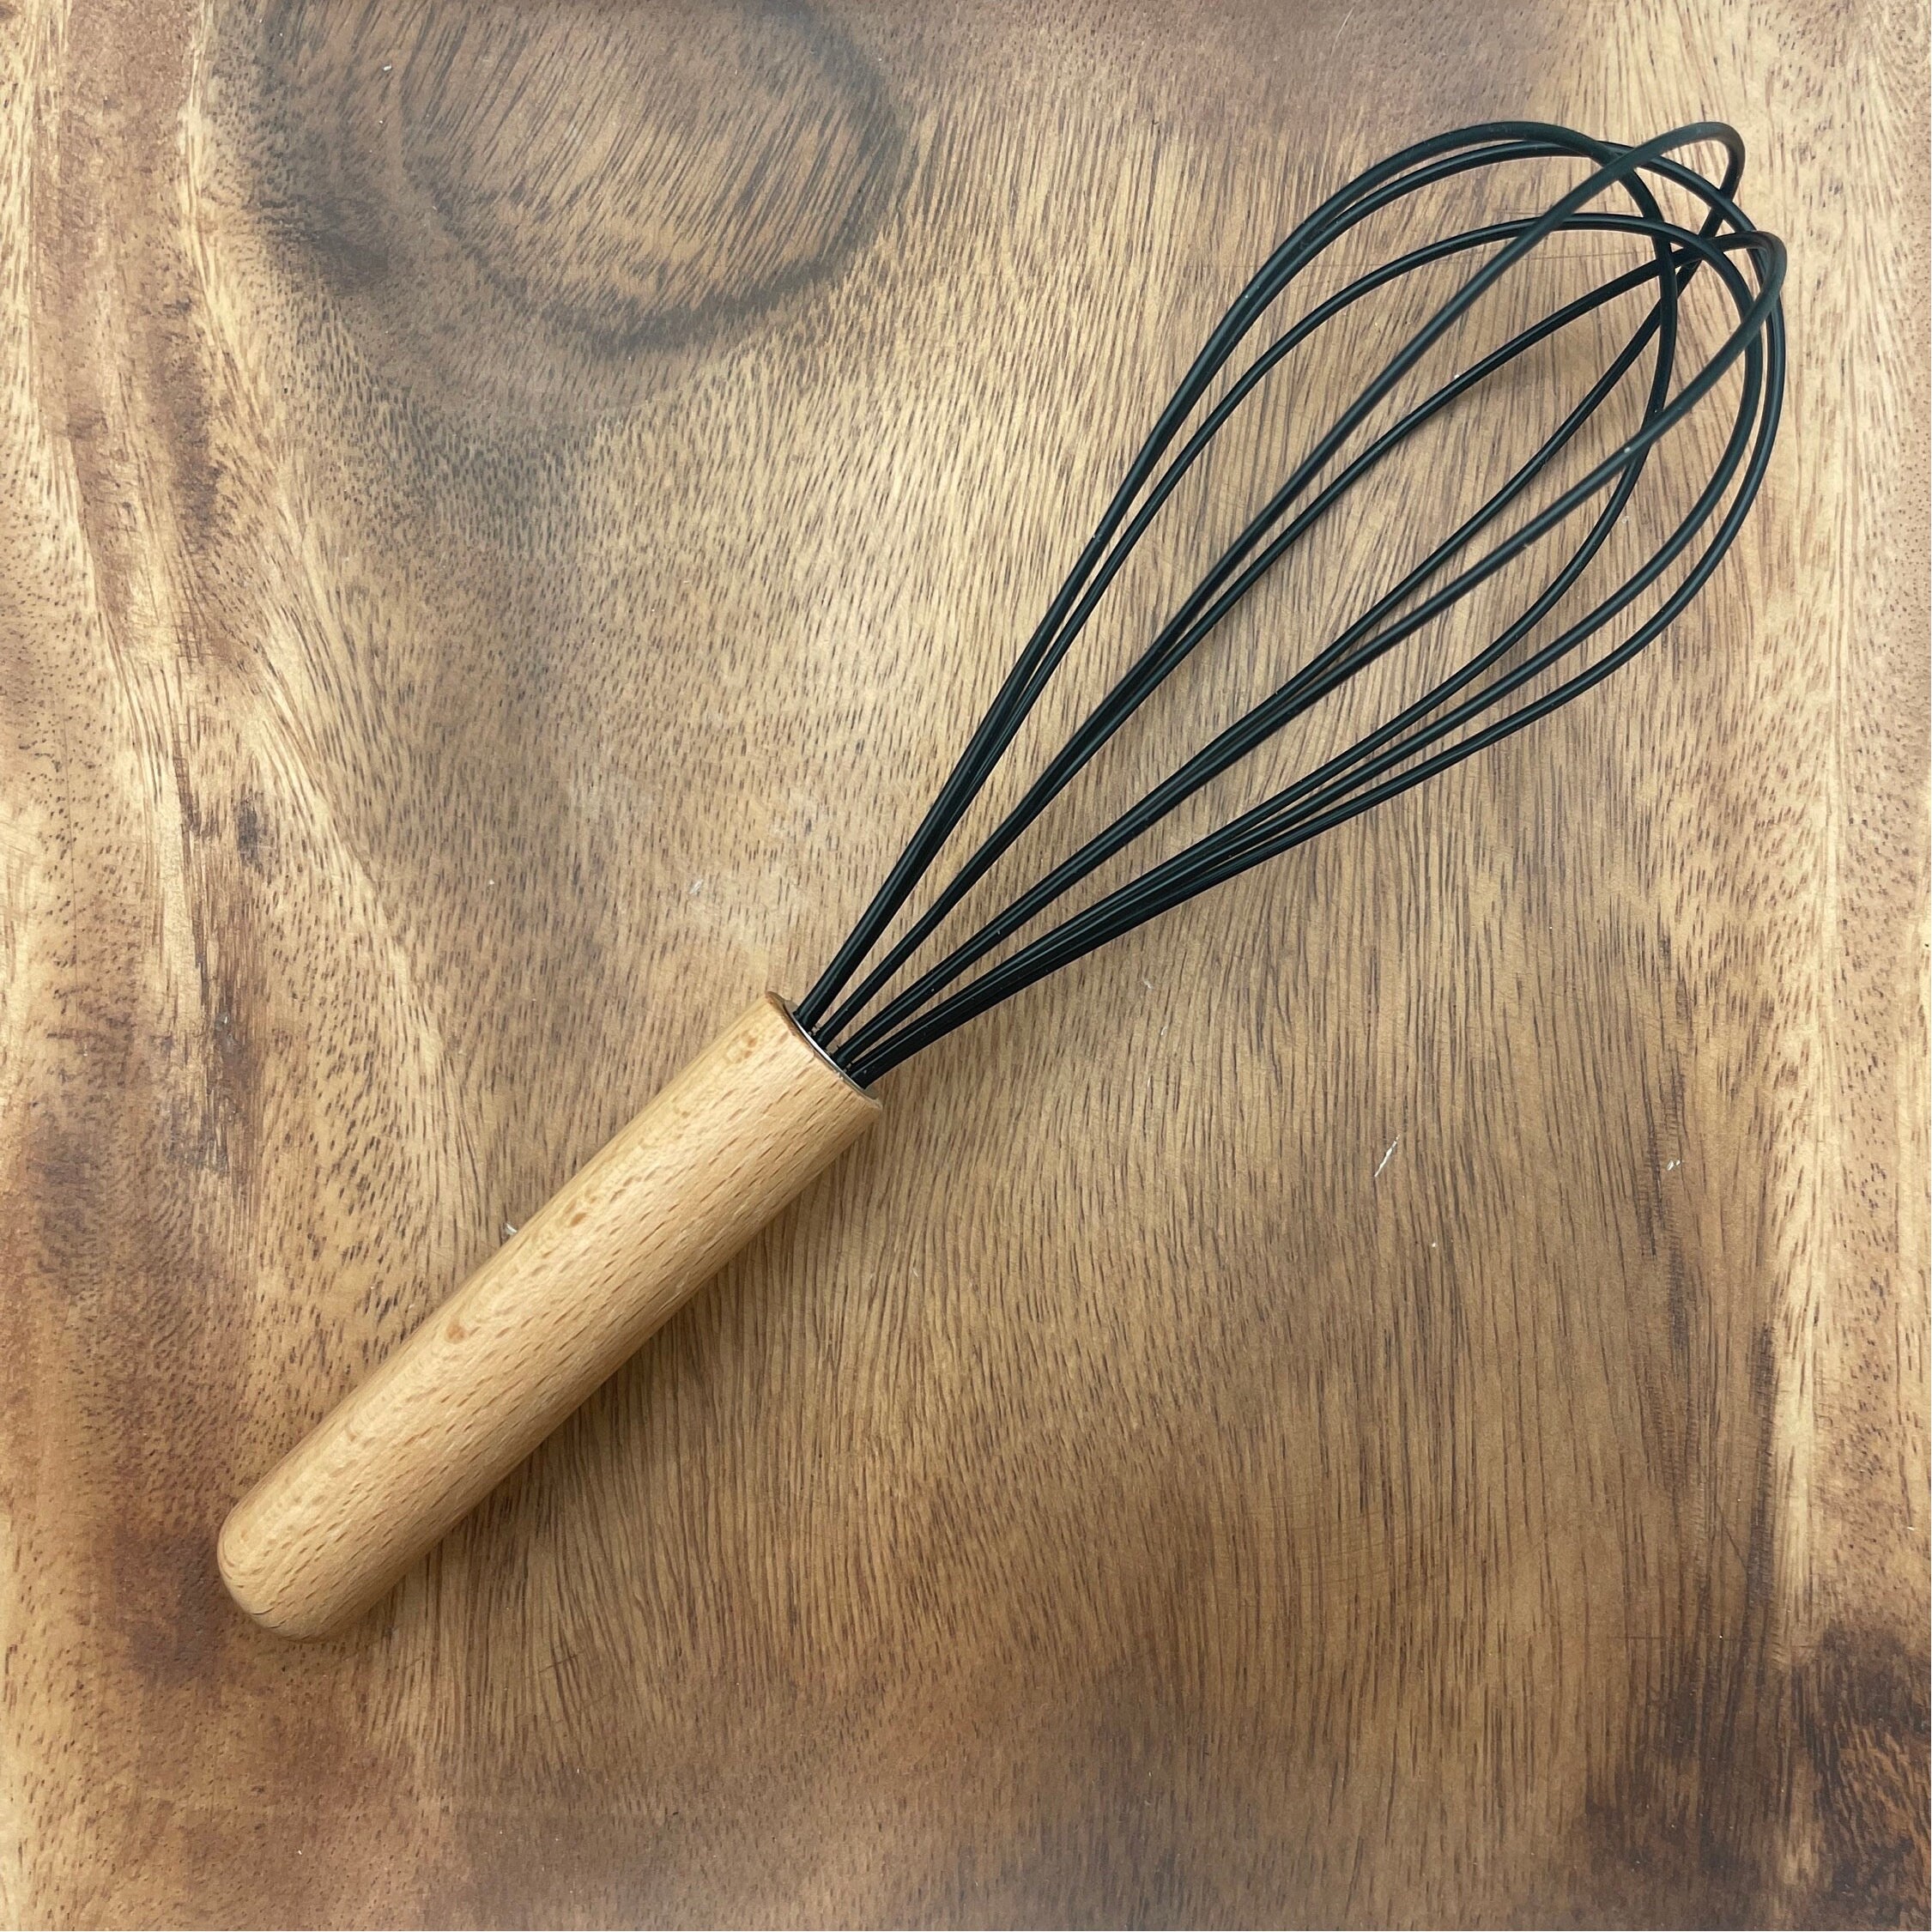 Imprinted Promotional Whisk  Personalized Whisk with Stainless Handle